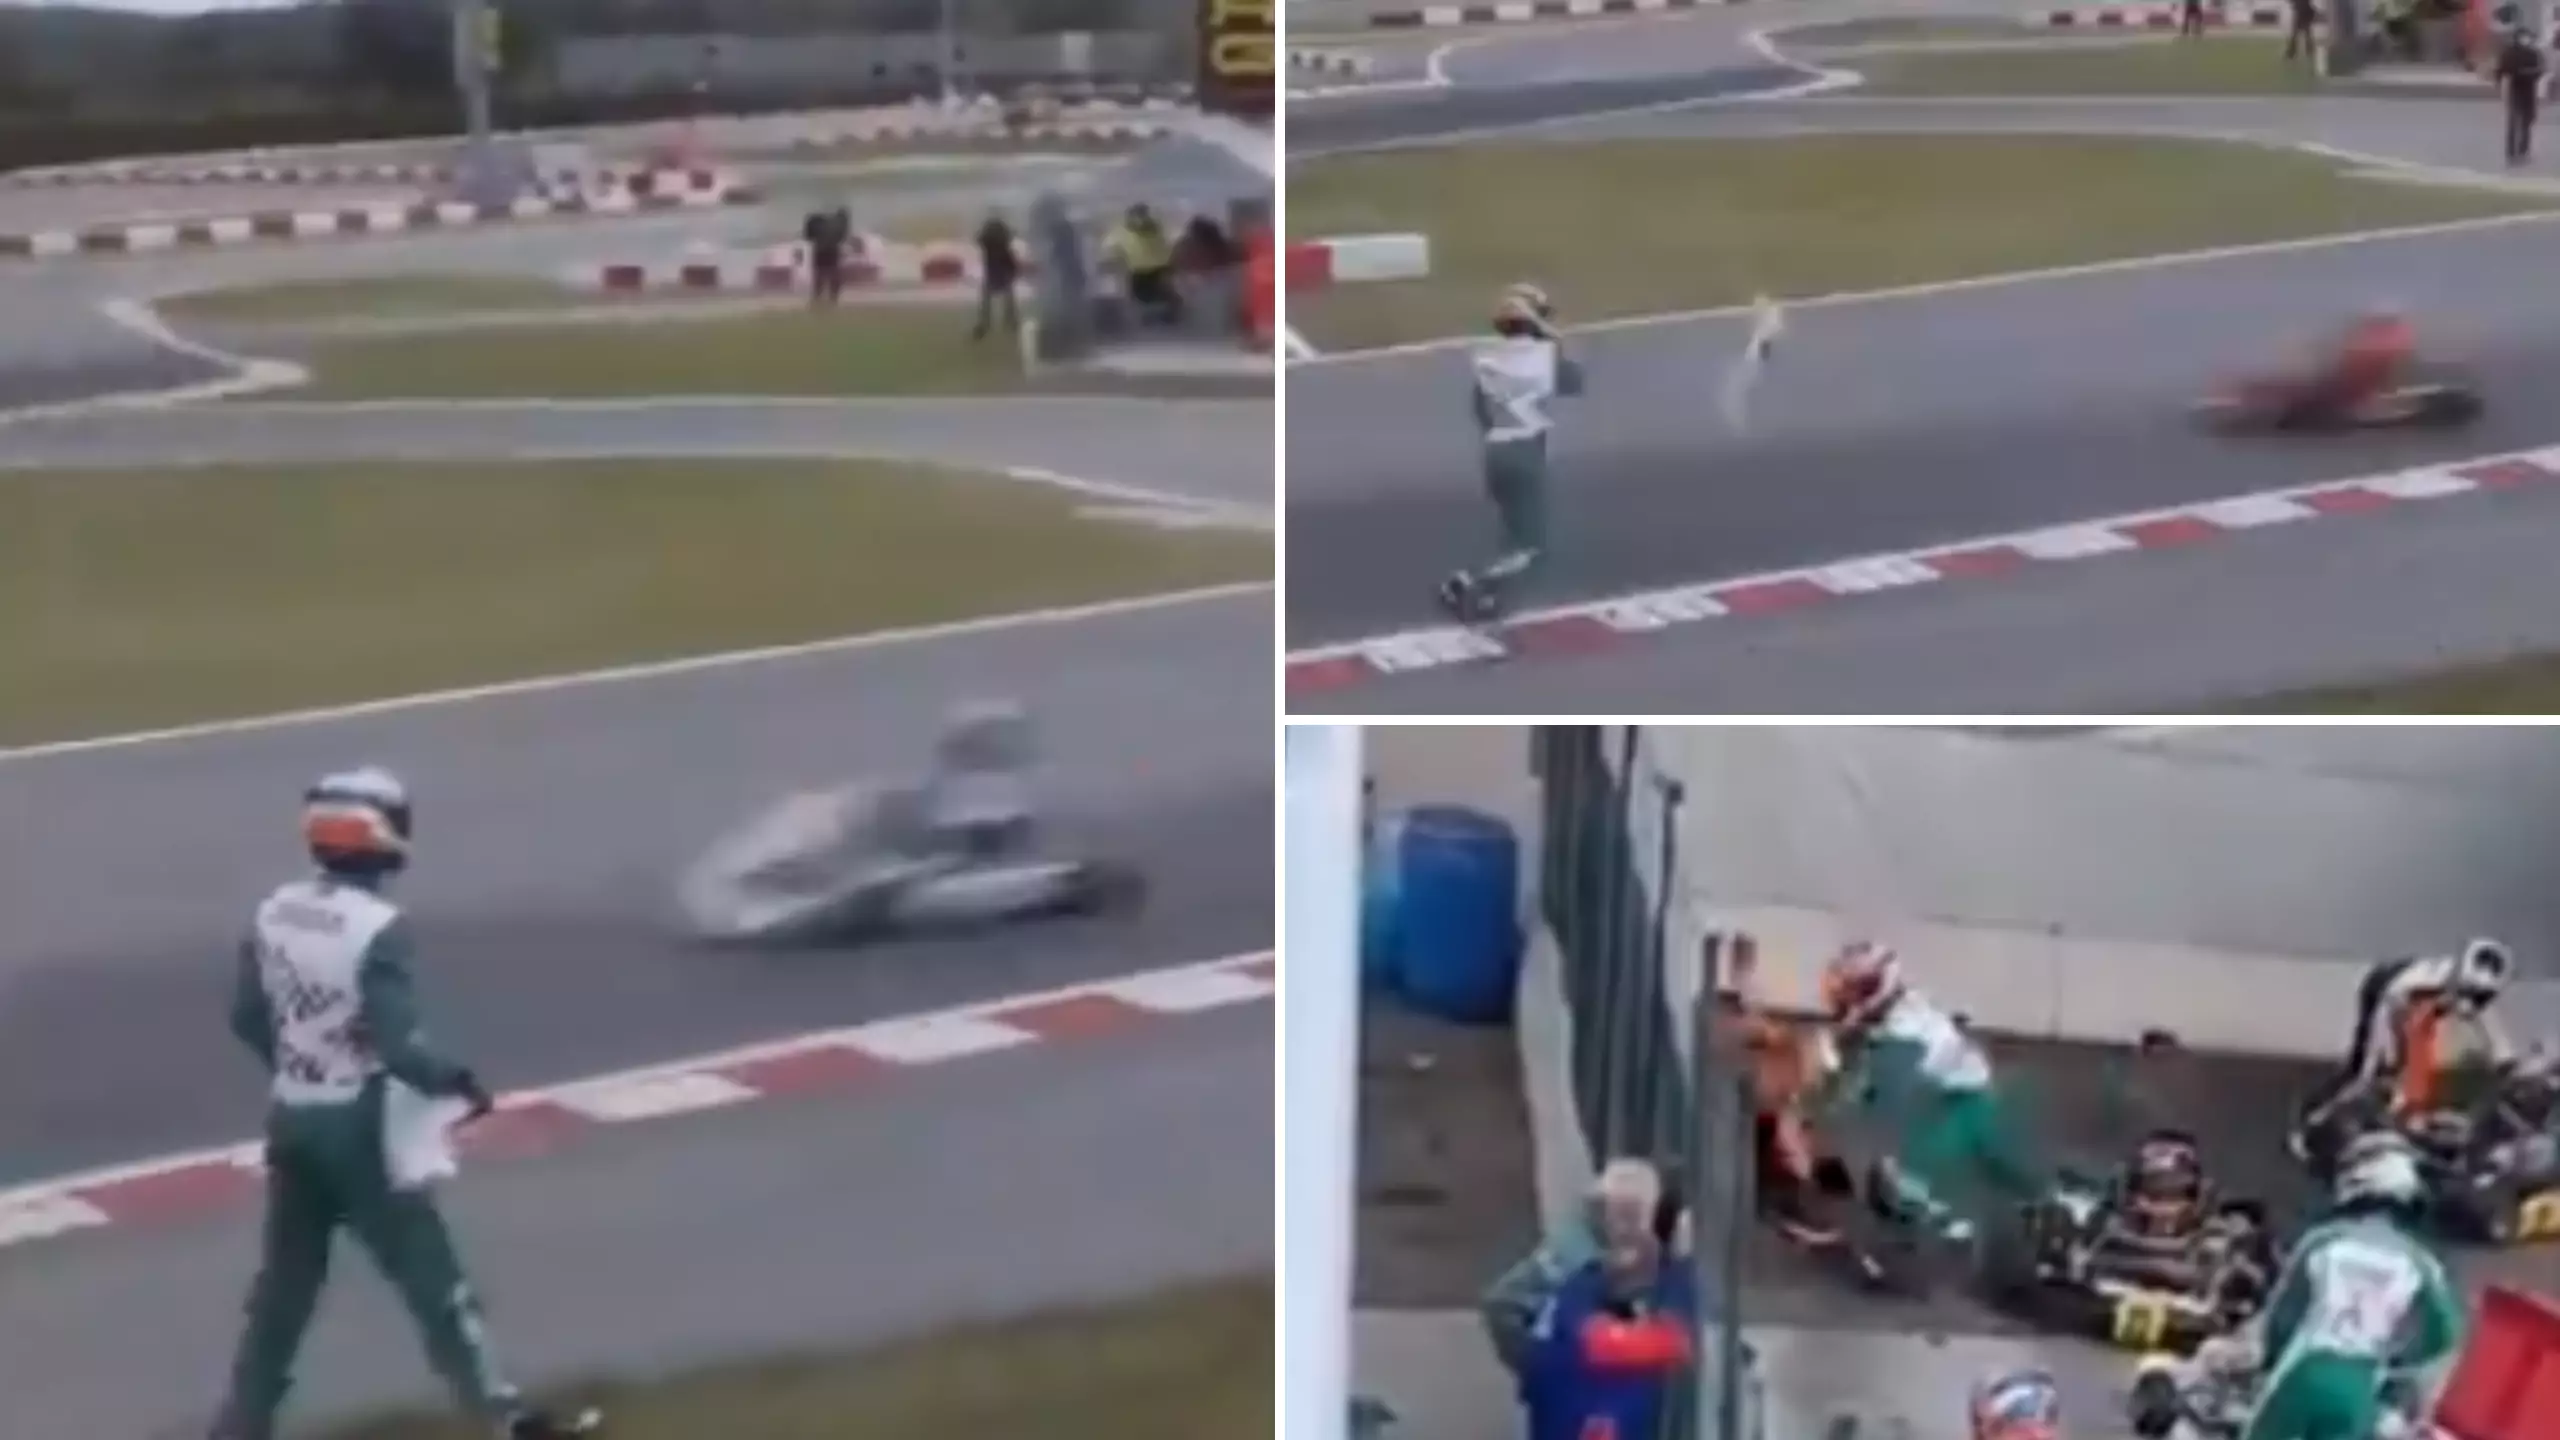 Luca Corberi Throws Bumper At Opposing Drivers In FIA KZ World Championship, Starts Brawl After Race